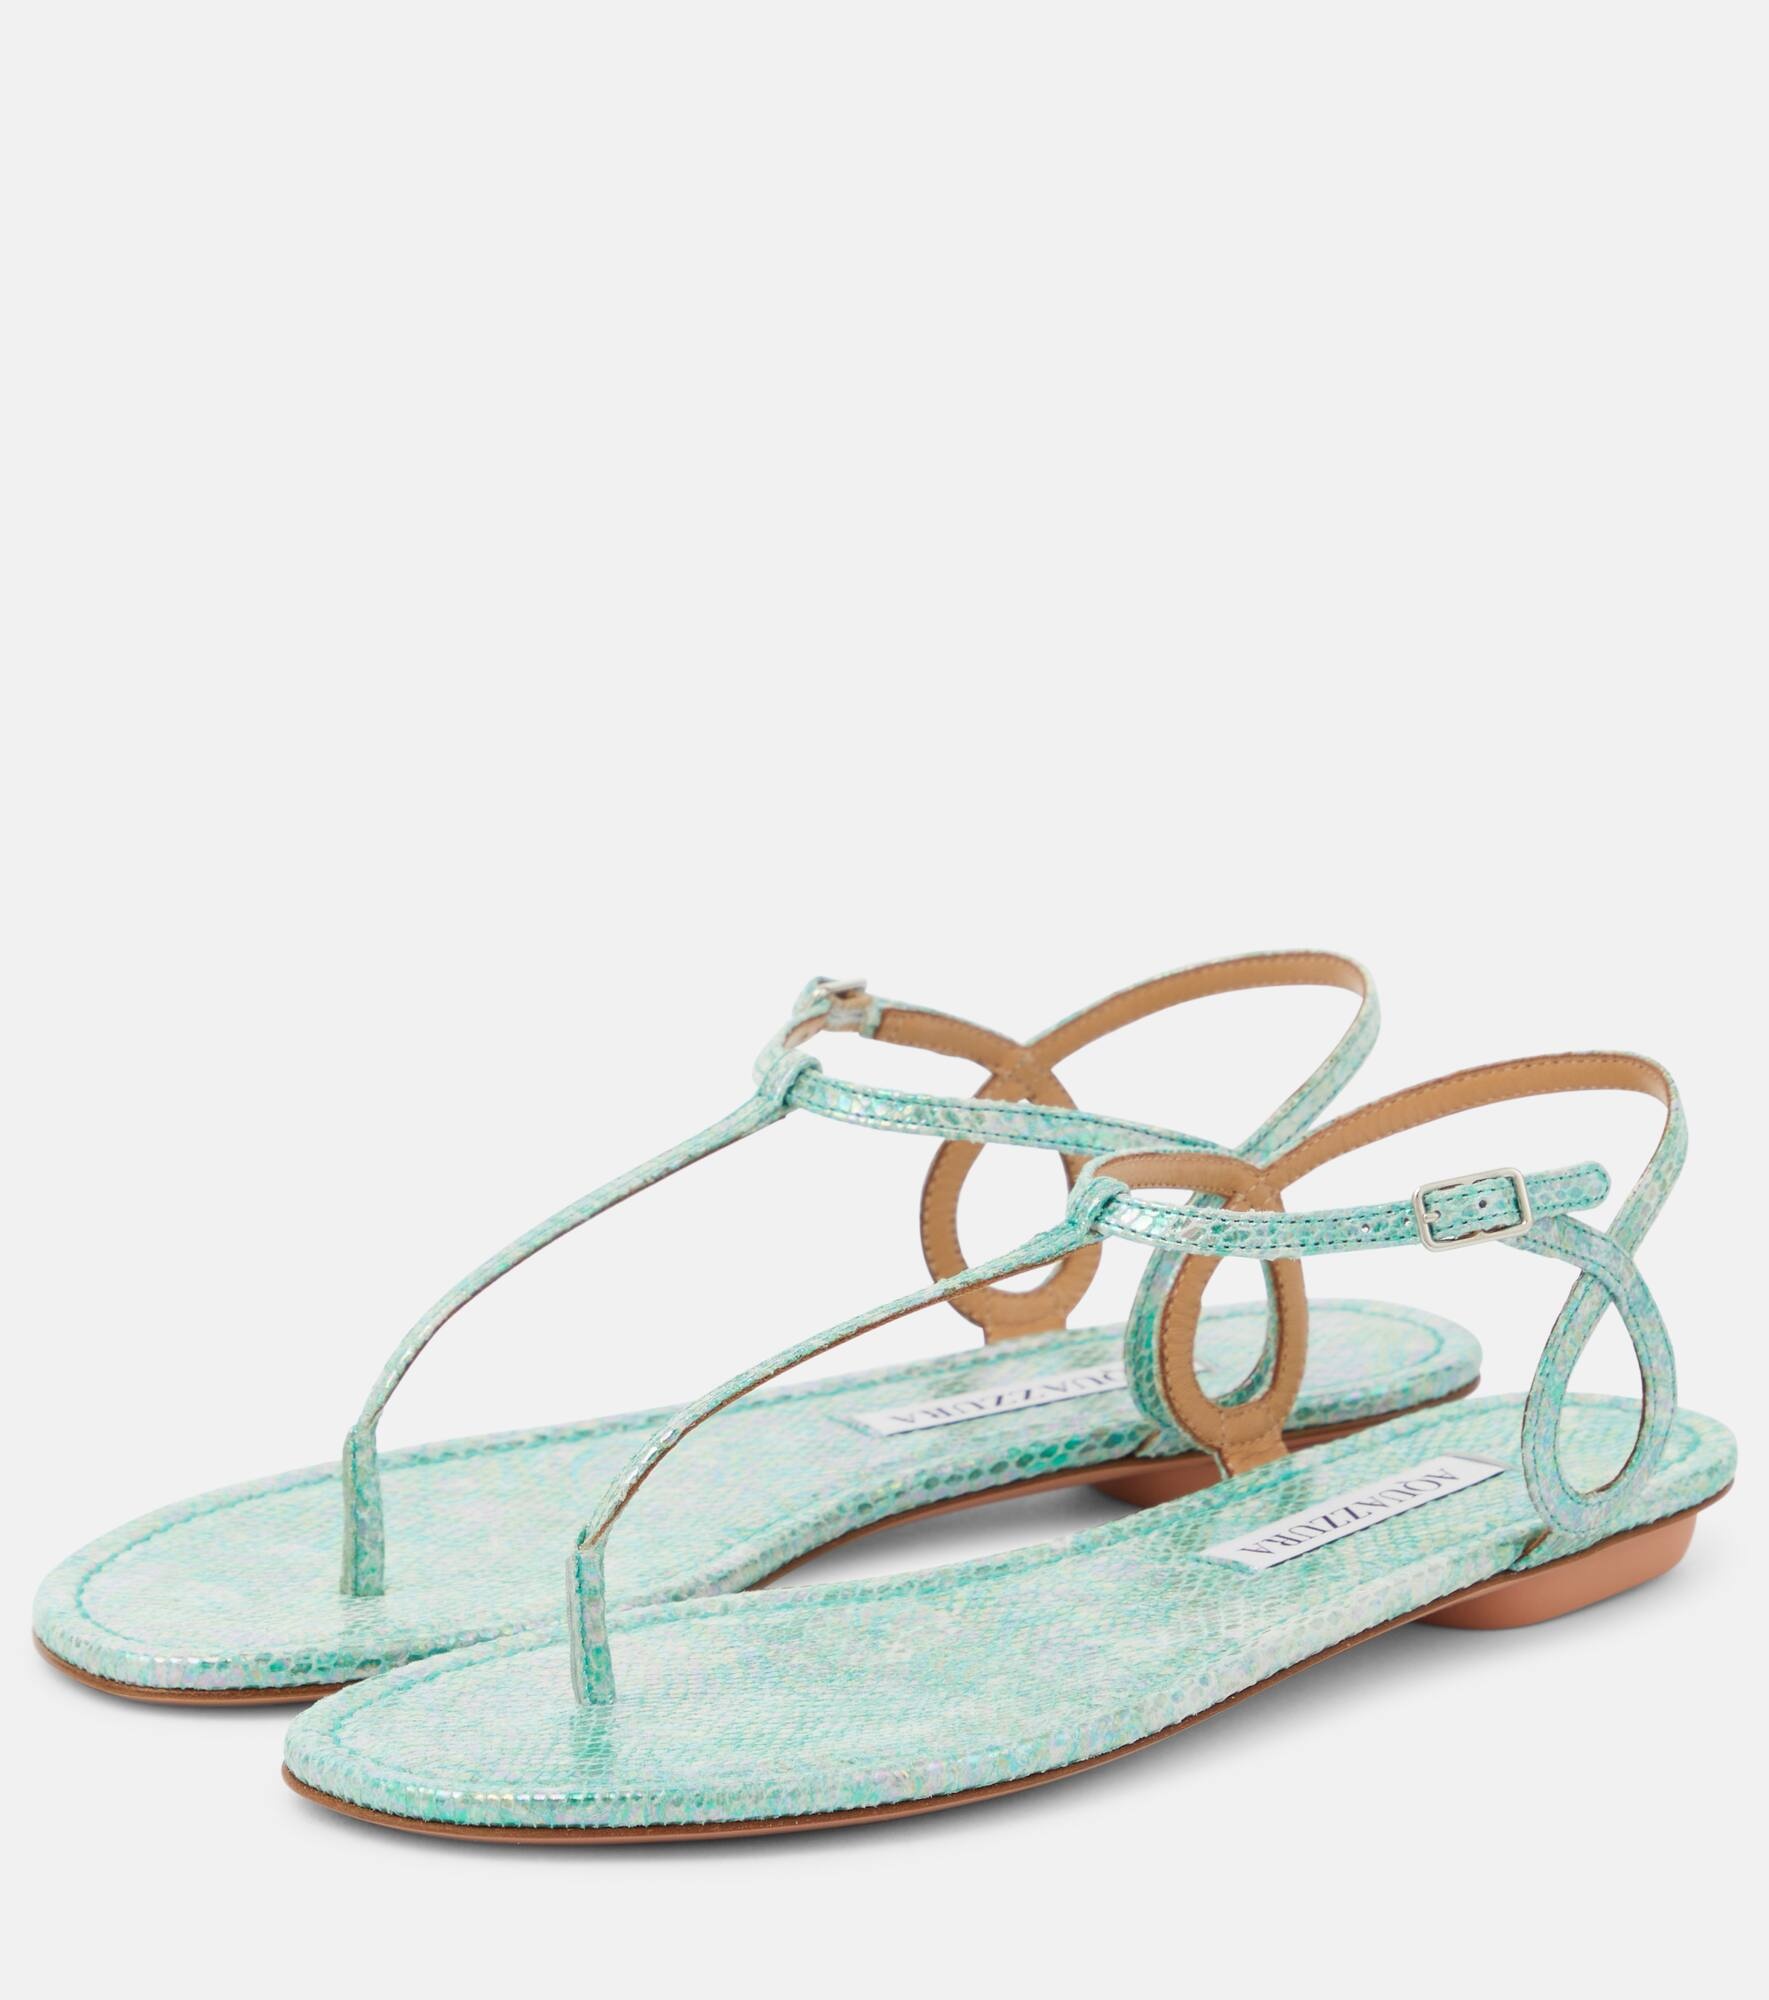 Almost Bare leather thong sandals - 5